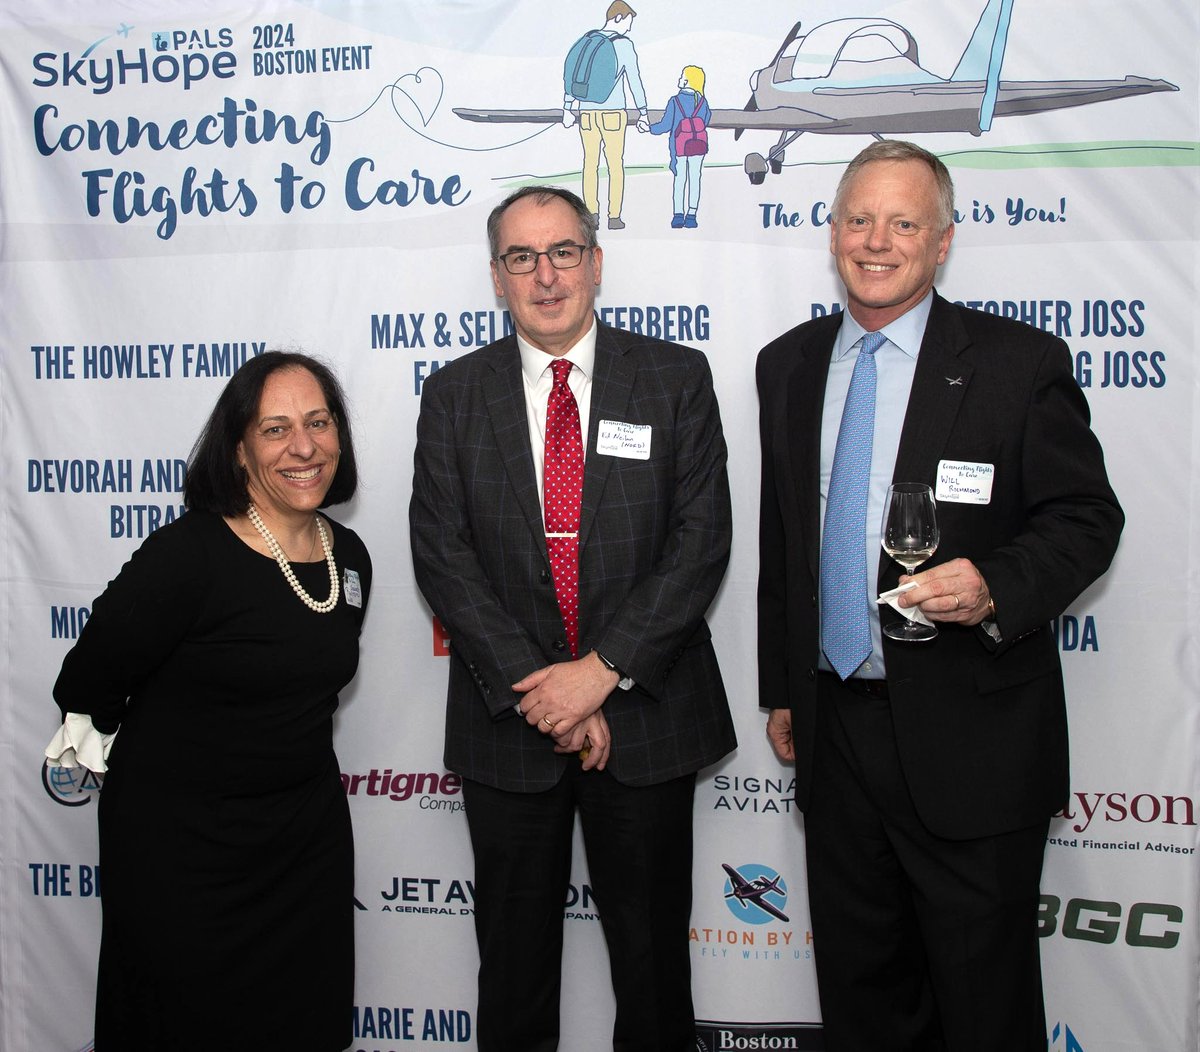 We joined NORD Member, PALS SkyHope, at their event in Boston about 'Connecting Flights to Care.' Long-time friend of NORD, @PALServices provides free air transportation to attend medical appointments more than a two hour drive from home. Learn more at palservices.org